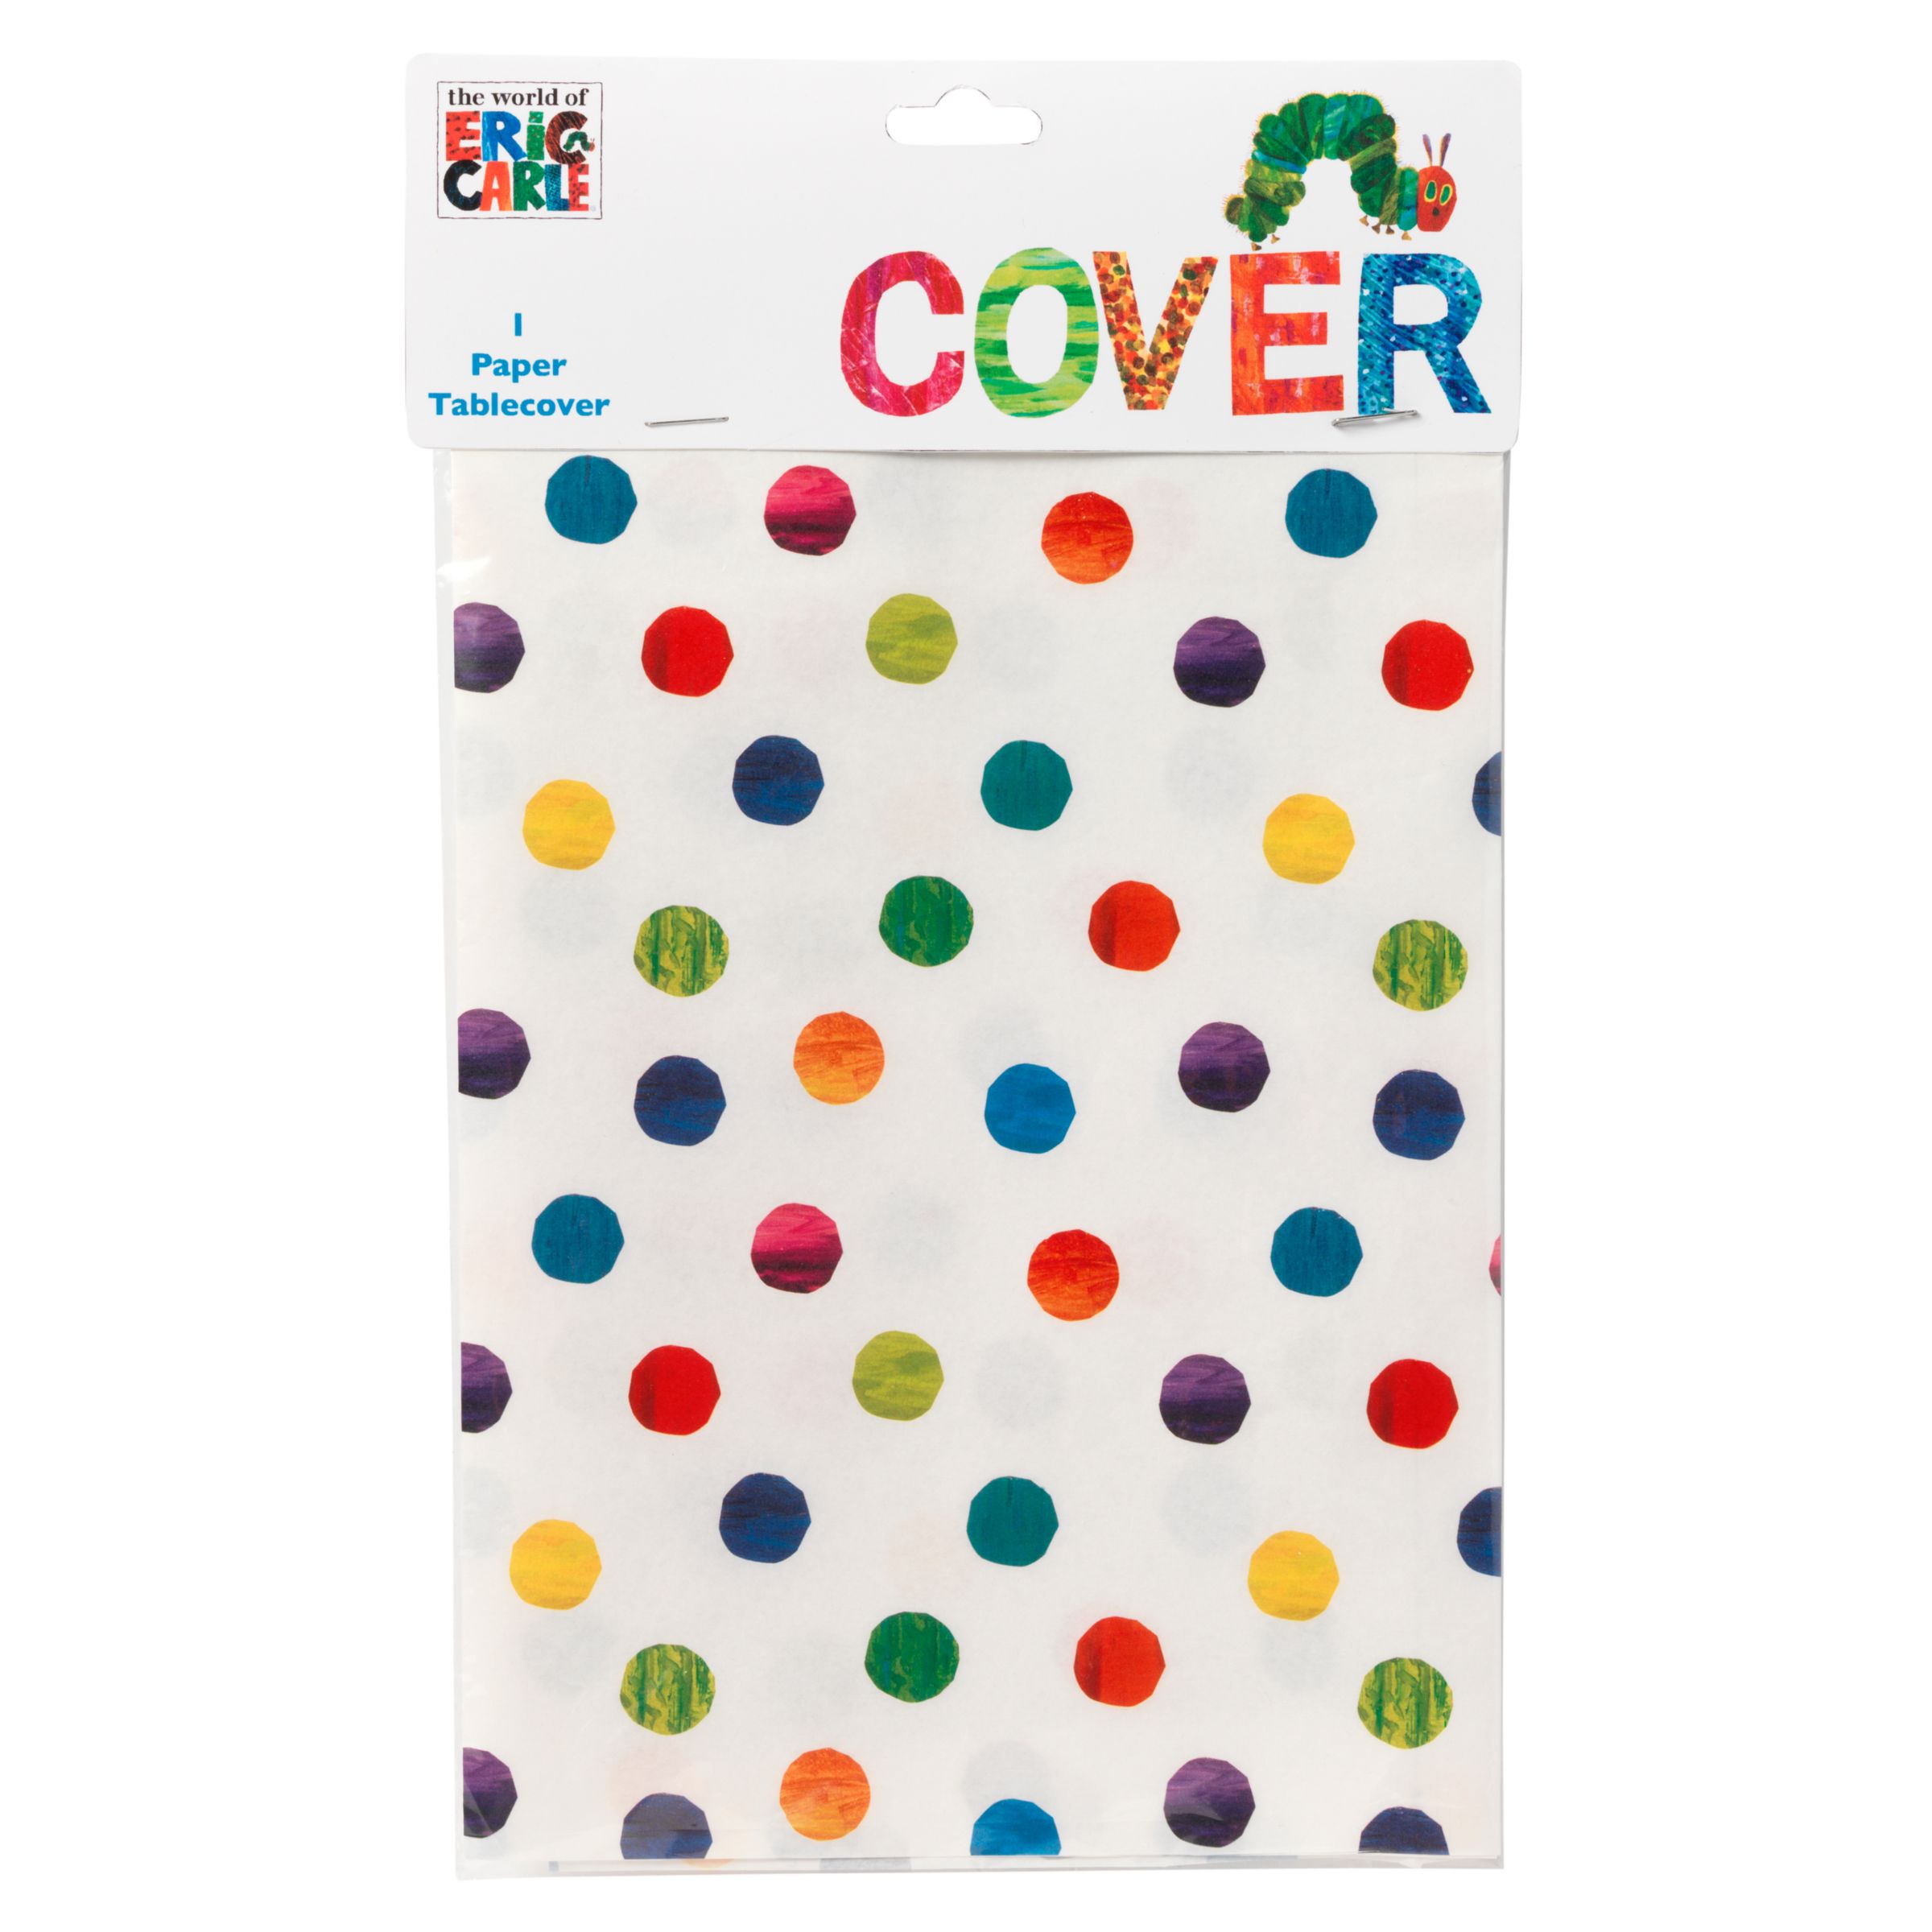 Hungry Caterpillar Paper Tablecover,